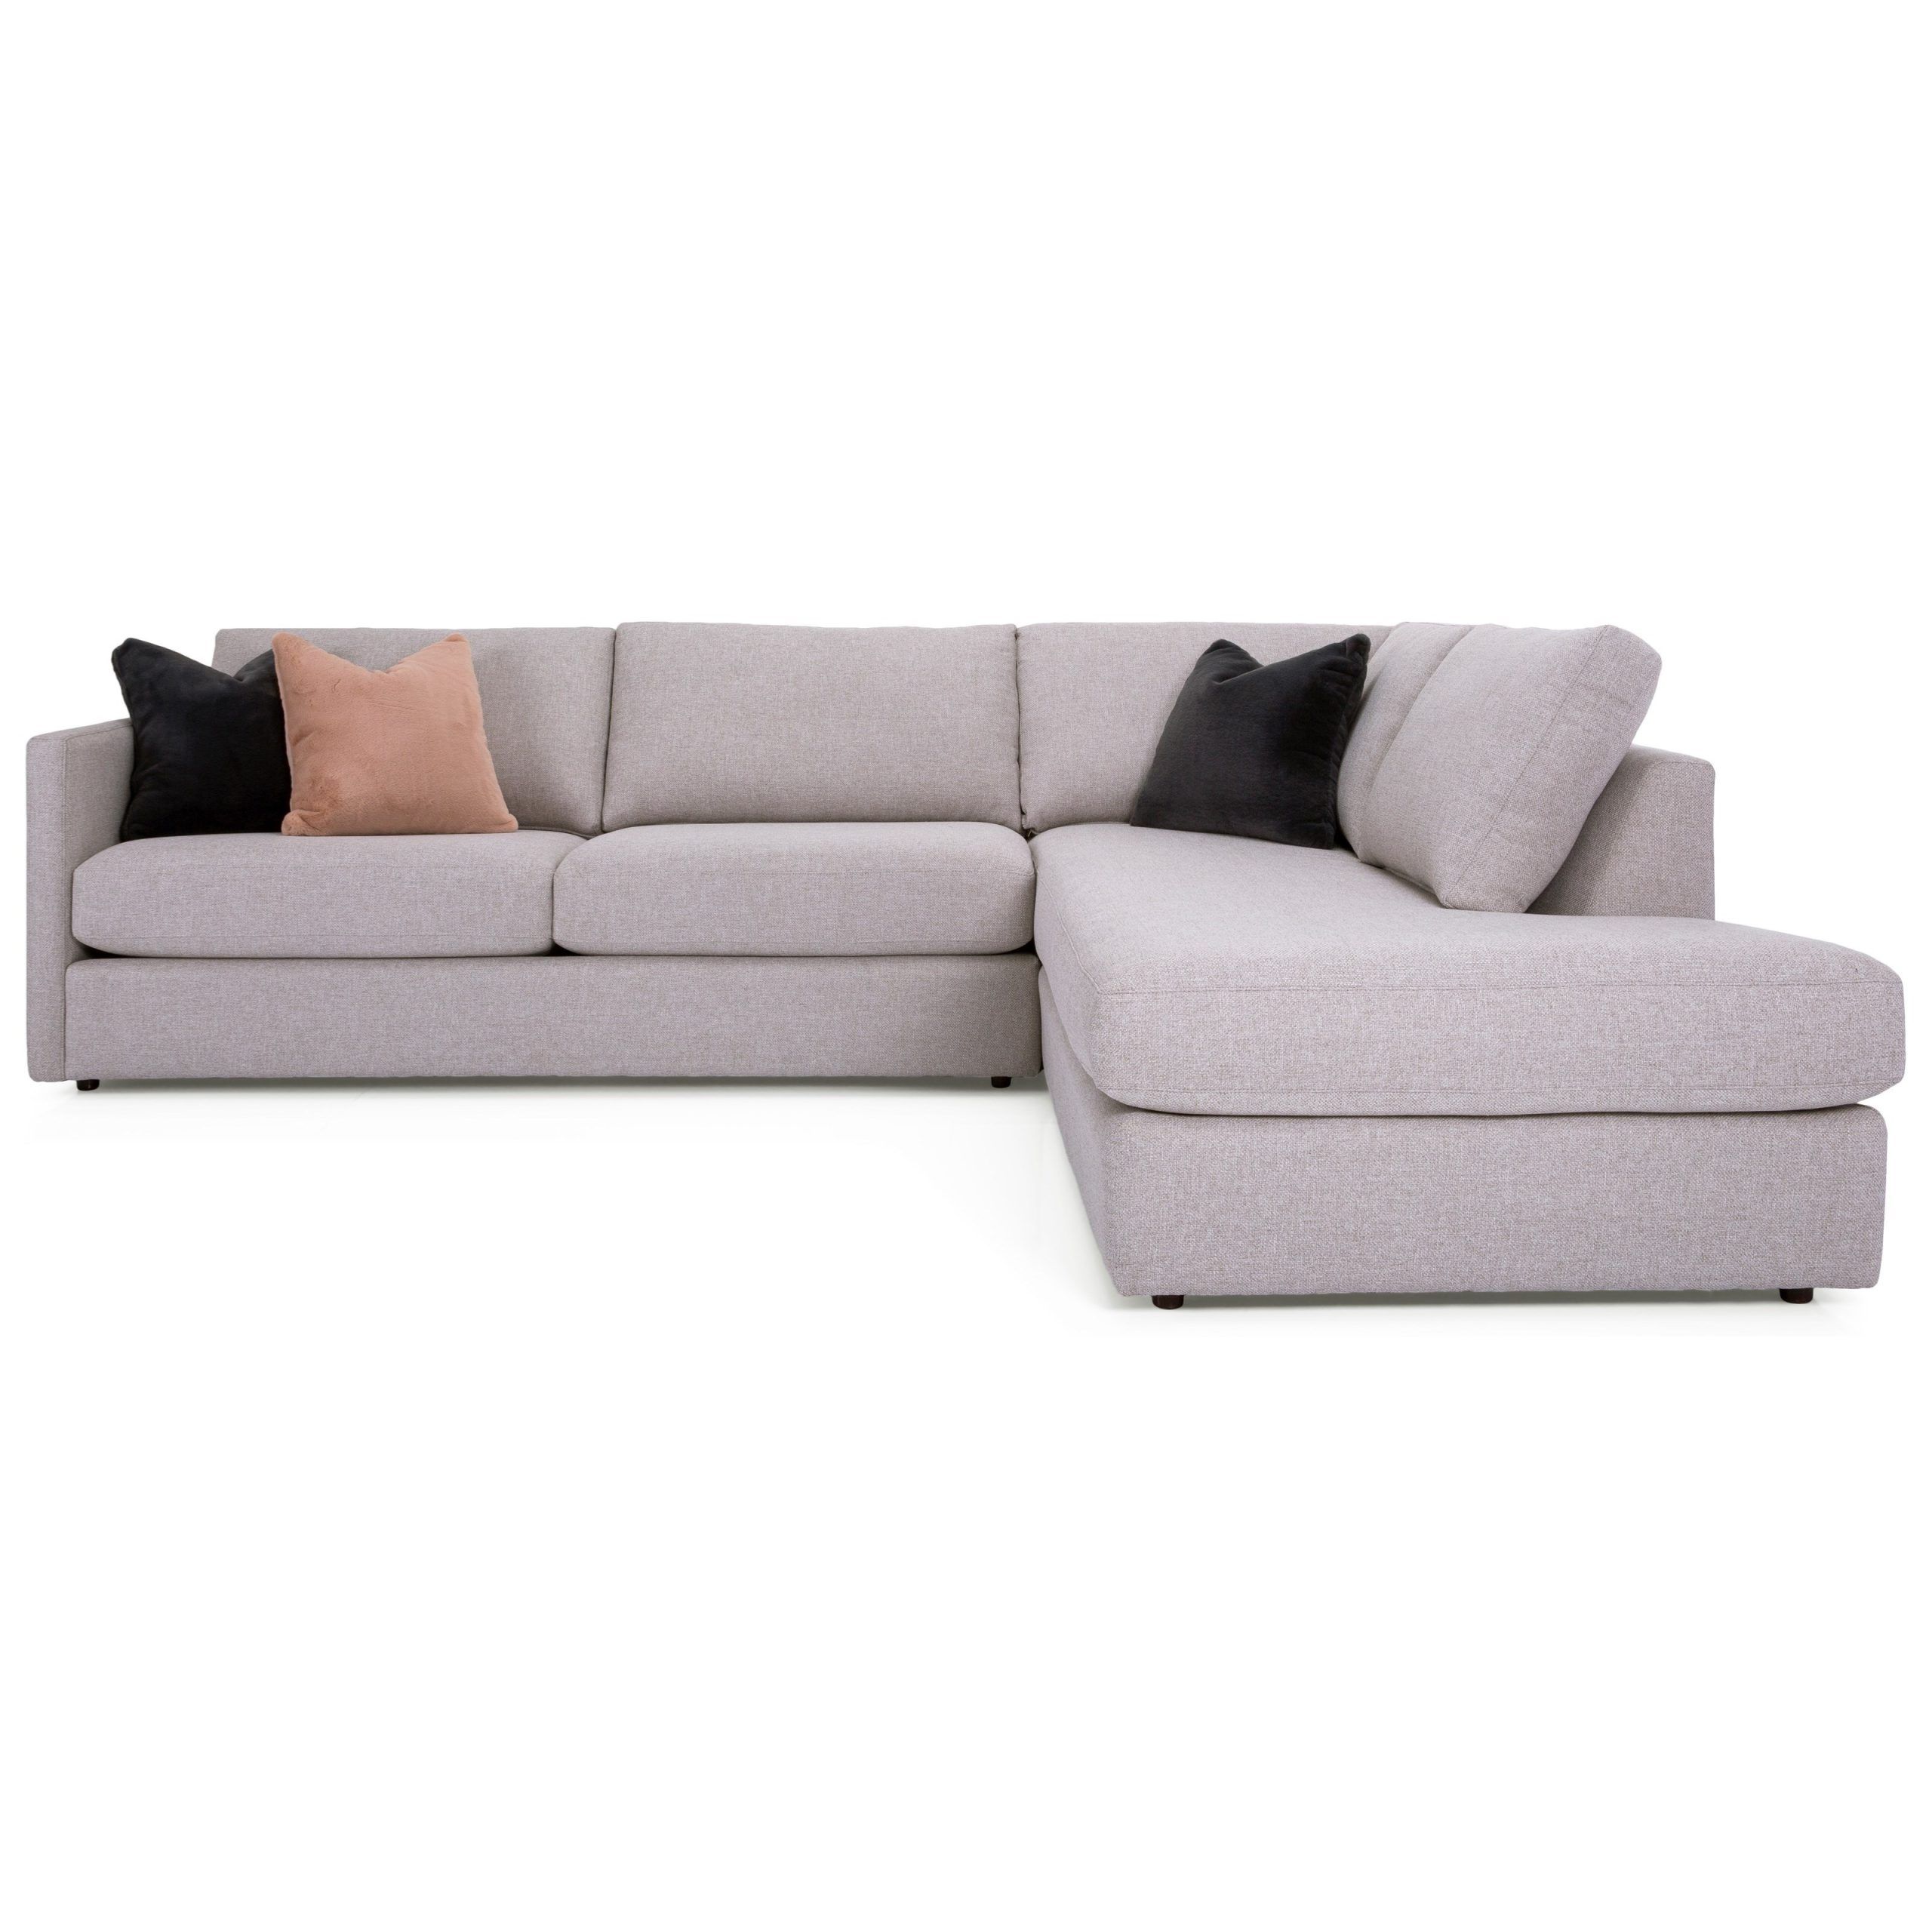 Taelor Designs Tess Contemporary L Shaped Sectional With Chaise In Modern L Shaped Sofa Sectionals (Gallery 17 of 20)